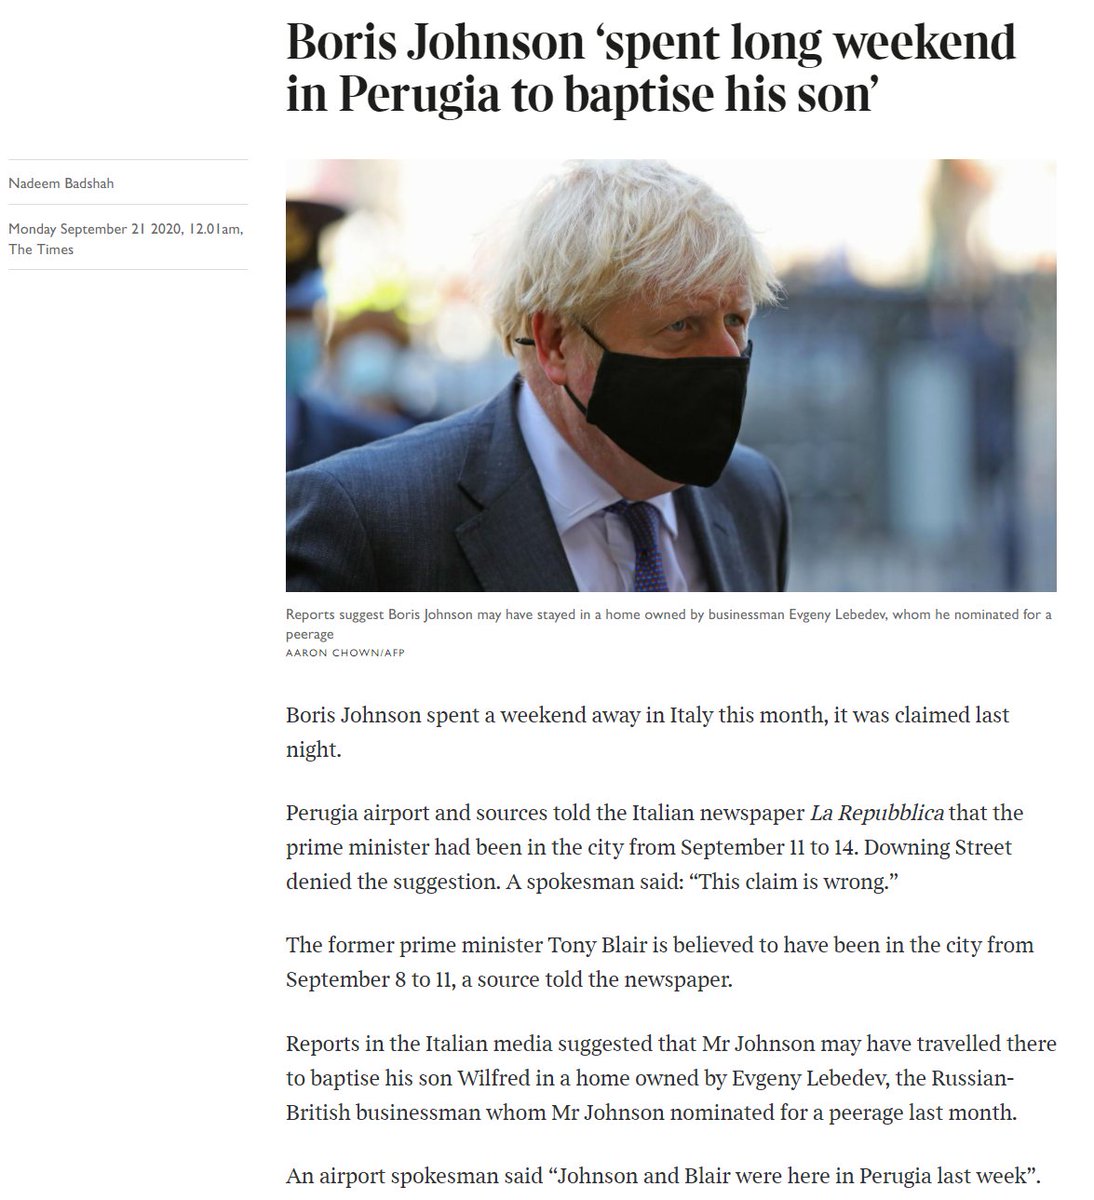 Note also this report from the Times today that puts their timelines in the city as:- Tony Blair Sep 8 - 11- Boris Johnson Sep 11 - 14As well as pointing out the Lebedev connection, which everyone should be keeping a very close eye on.